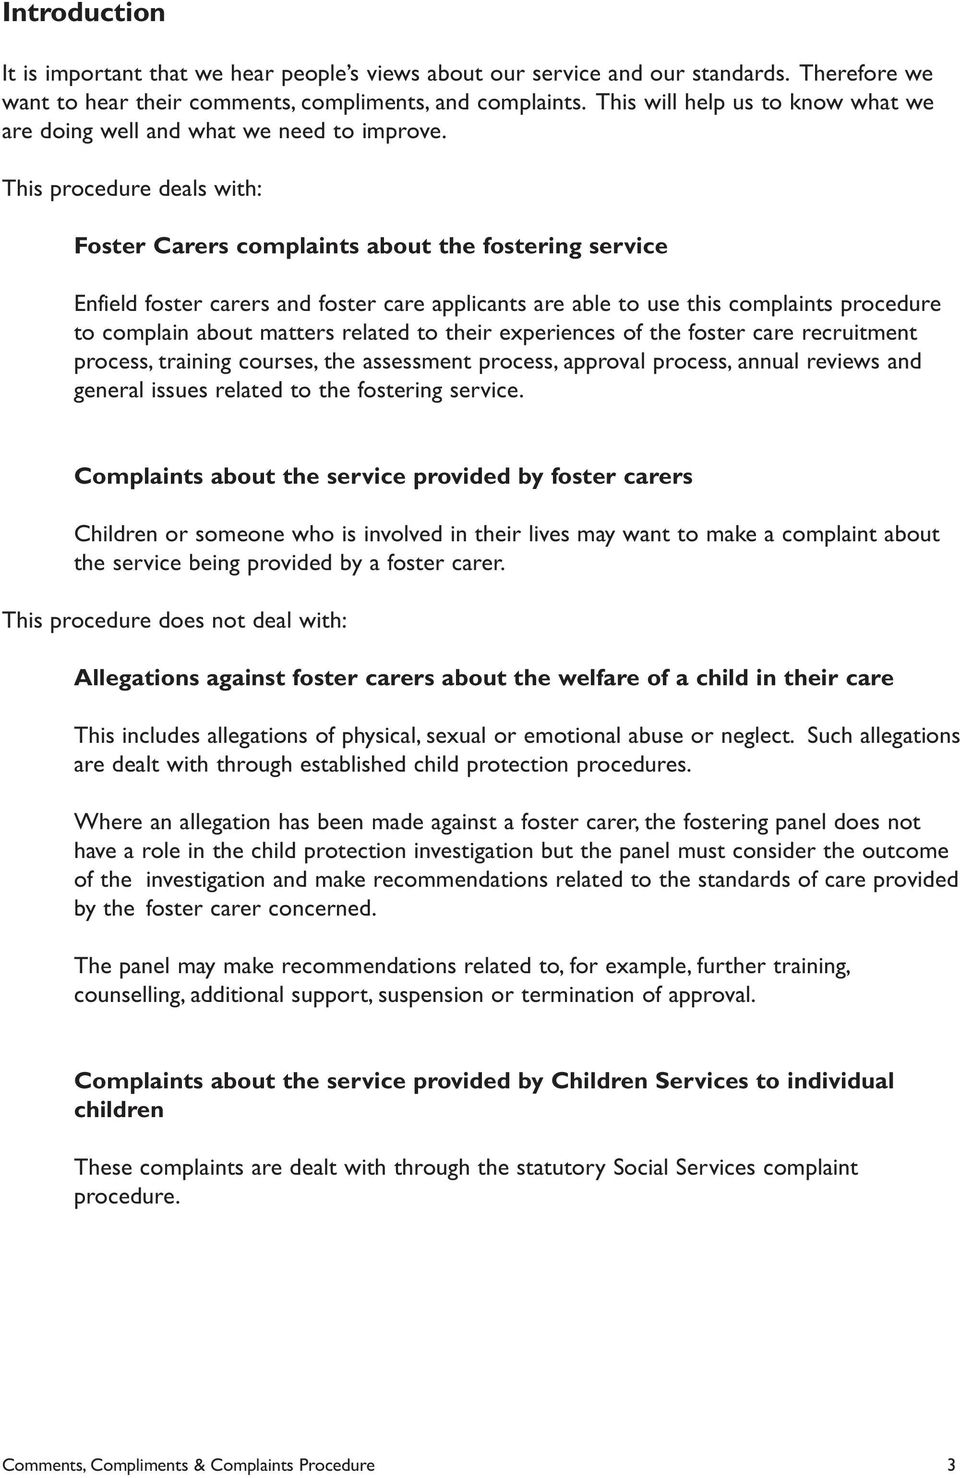 This procedure deals with: Foster Carers complaints about the fostering service Enfield foster carers and foster care applicants are able to use this complaints procedure to complain about matters